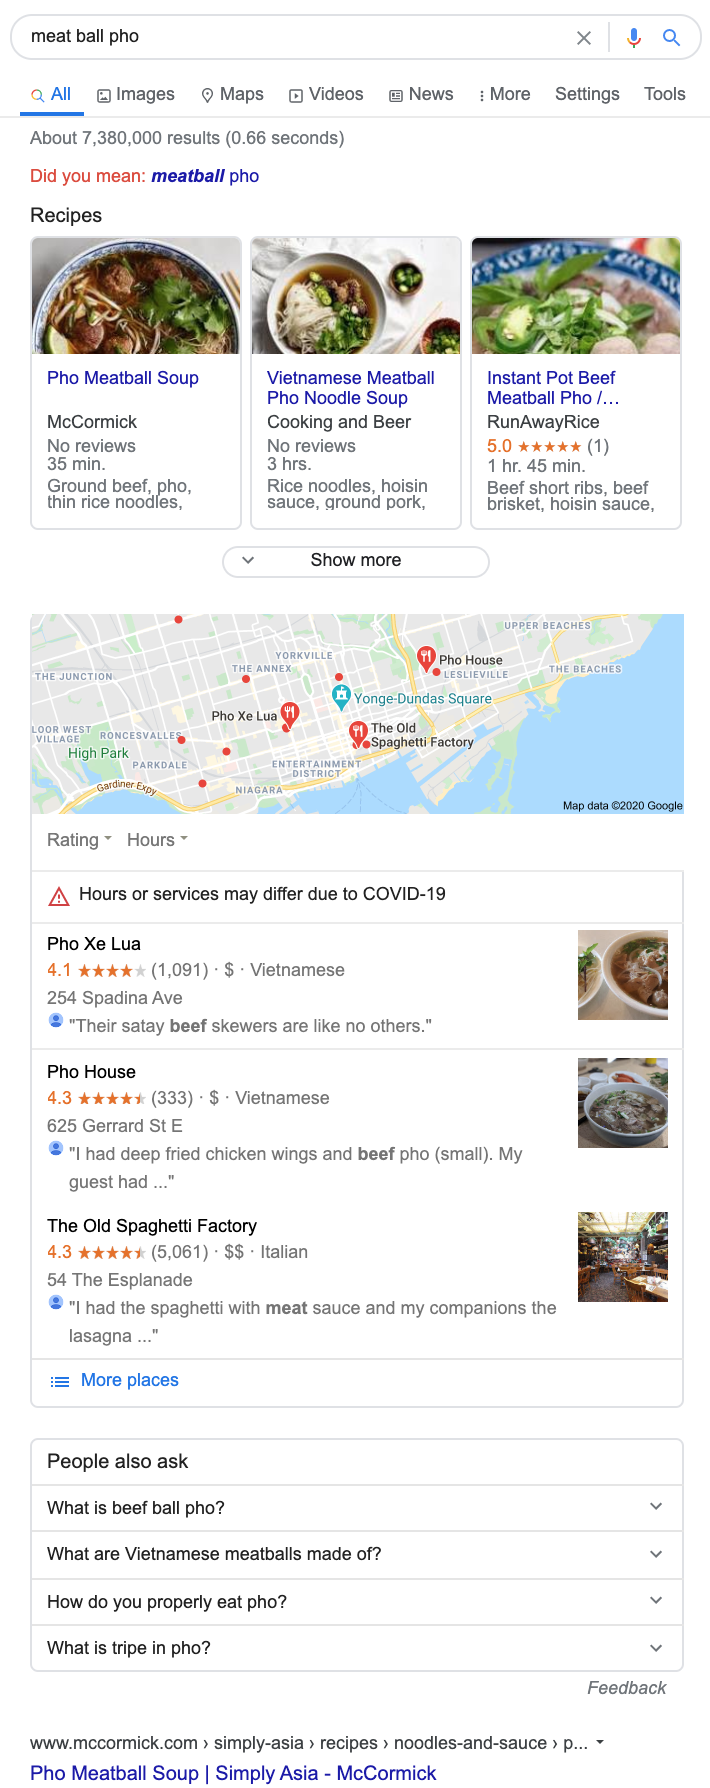 Google search results for "meat ball pho" from Toronto